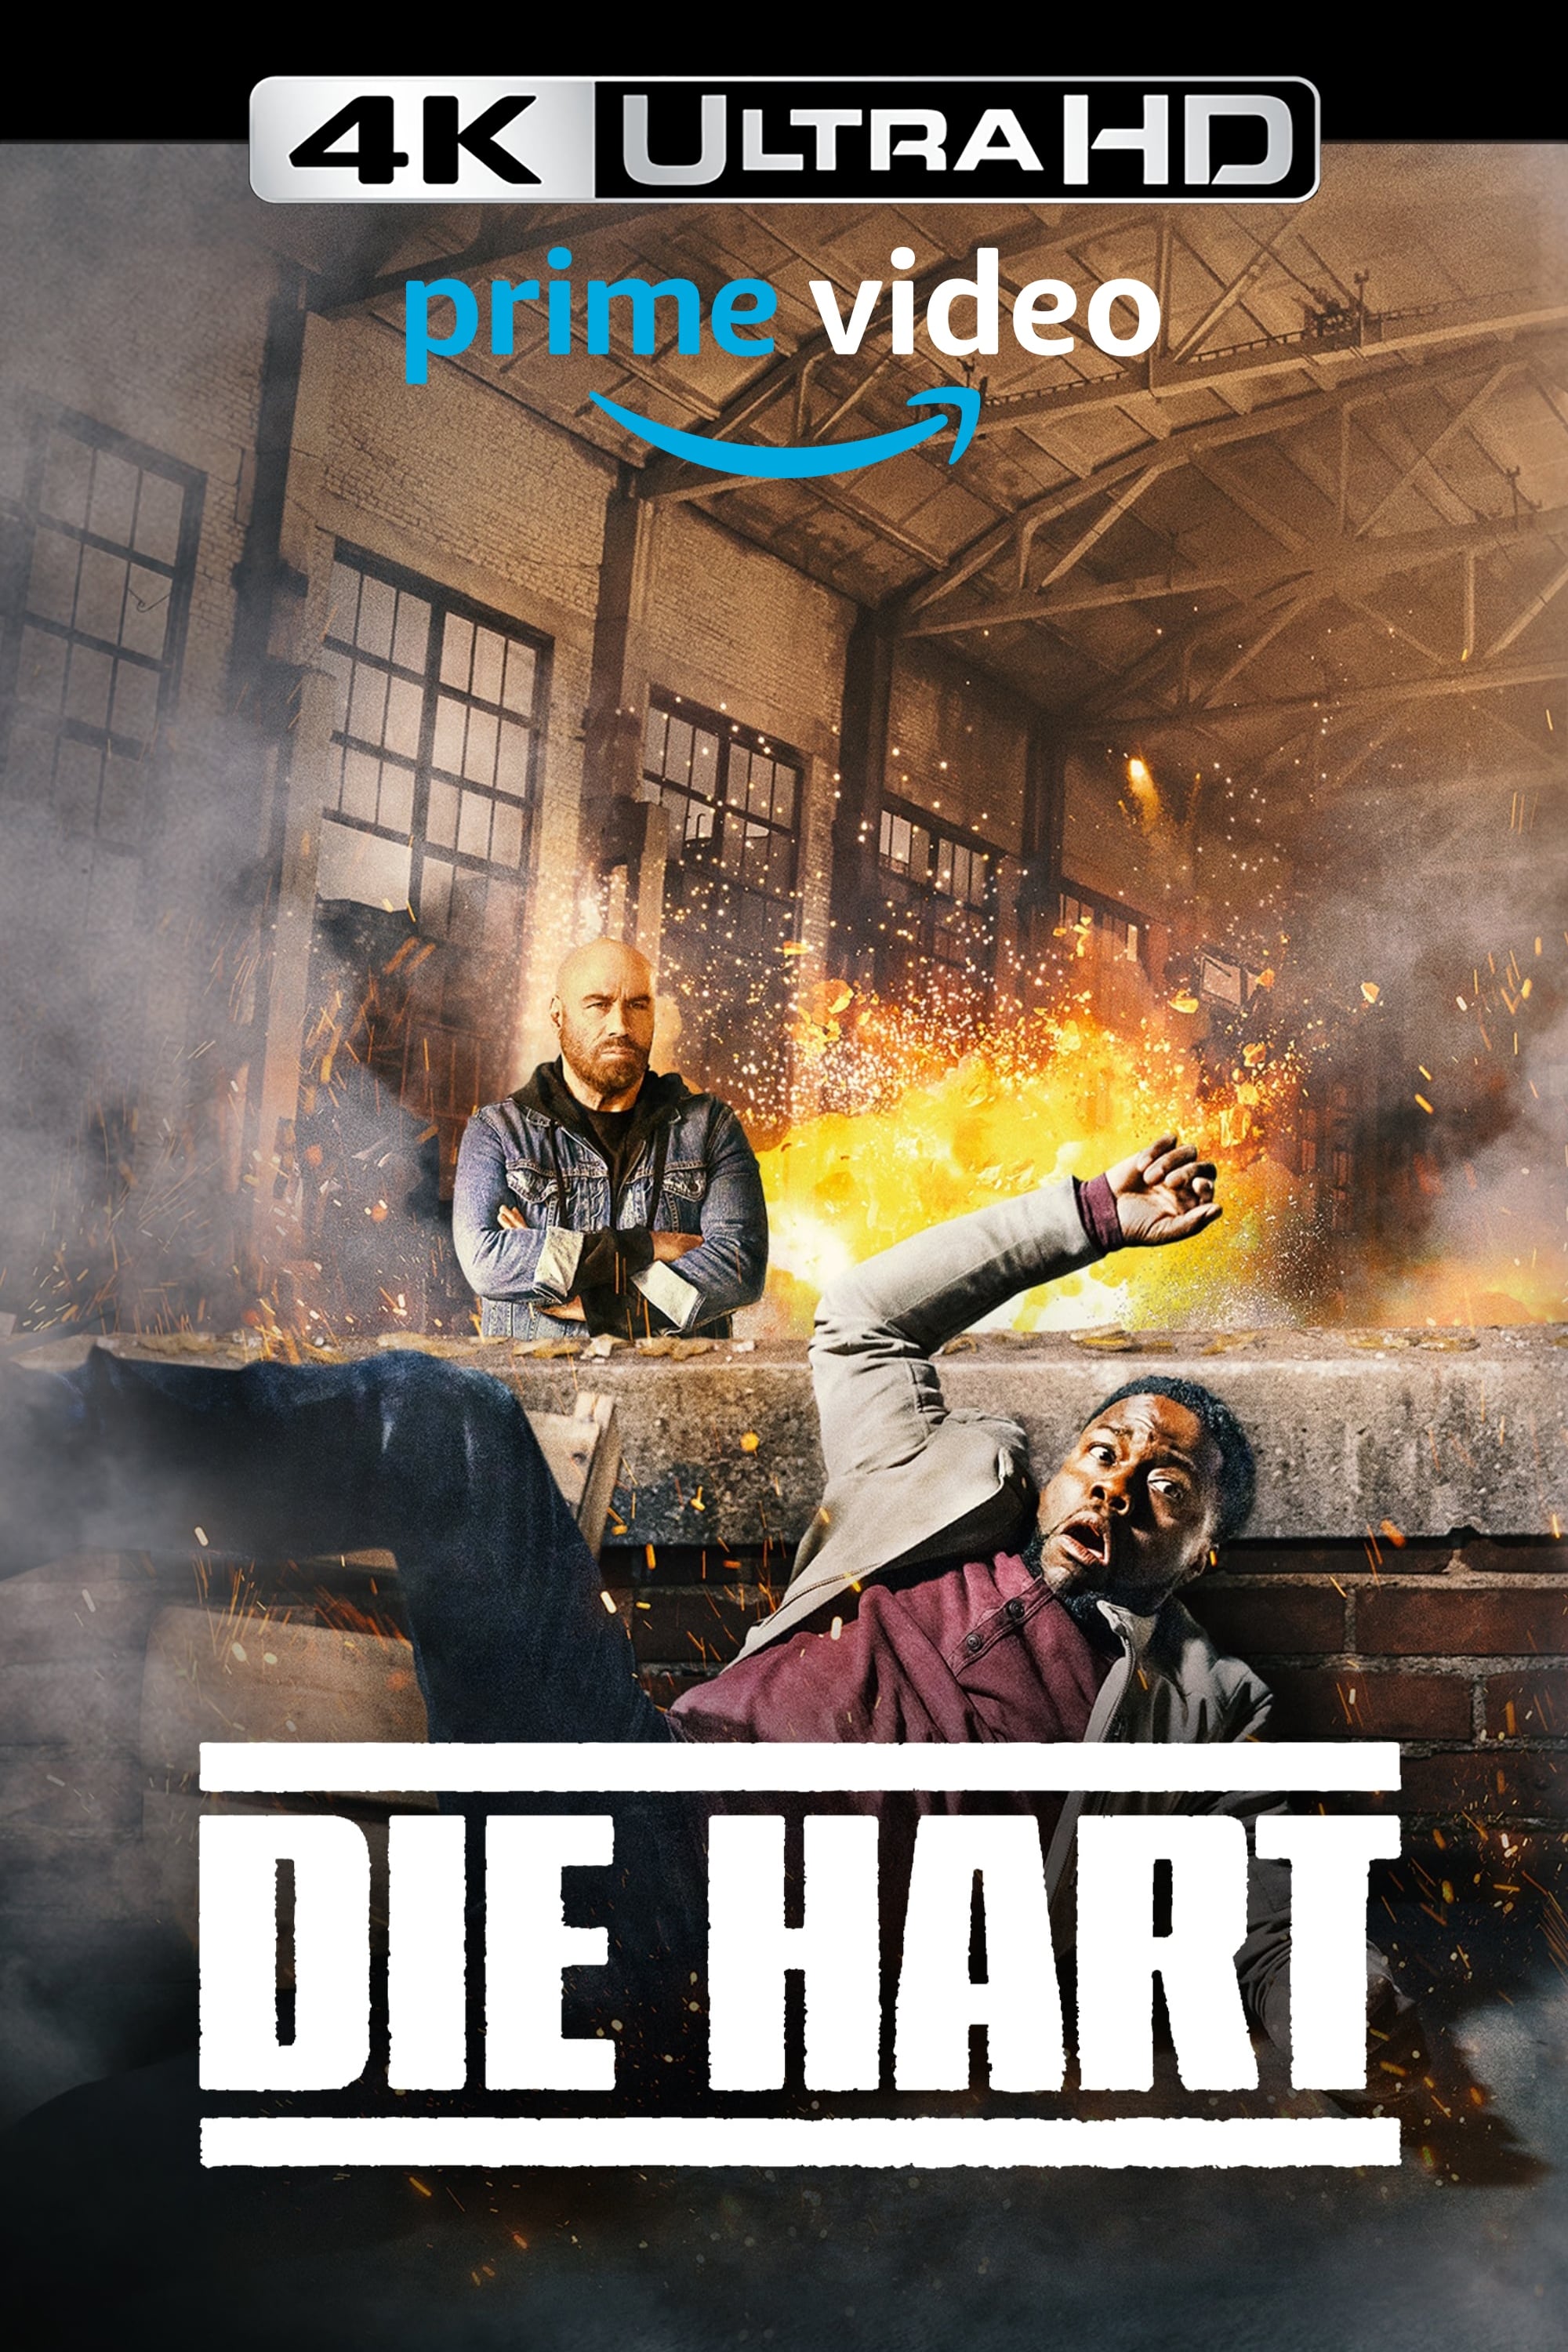 Kevin Hart - playing a version of himself - is on a death-defying quest to become an action star. And with a little help from John Travolta, Nathalie Emmanuel, and Josh Hartnett - he just might pull it off.